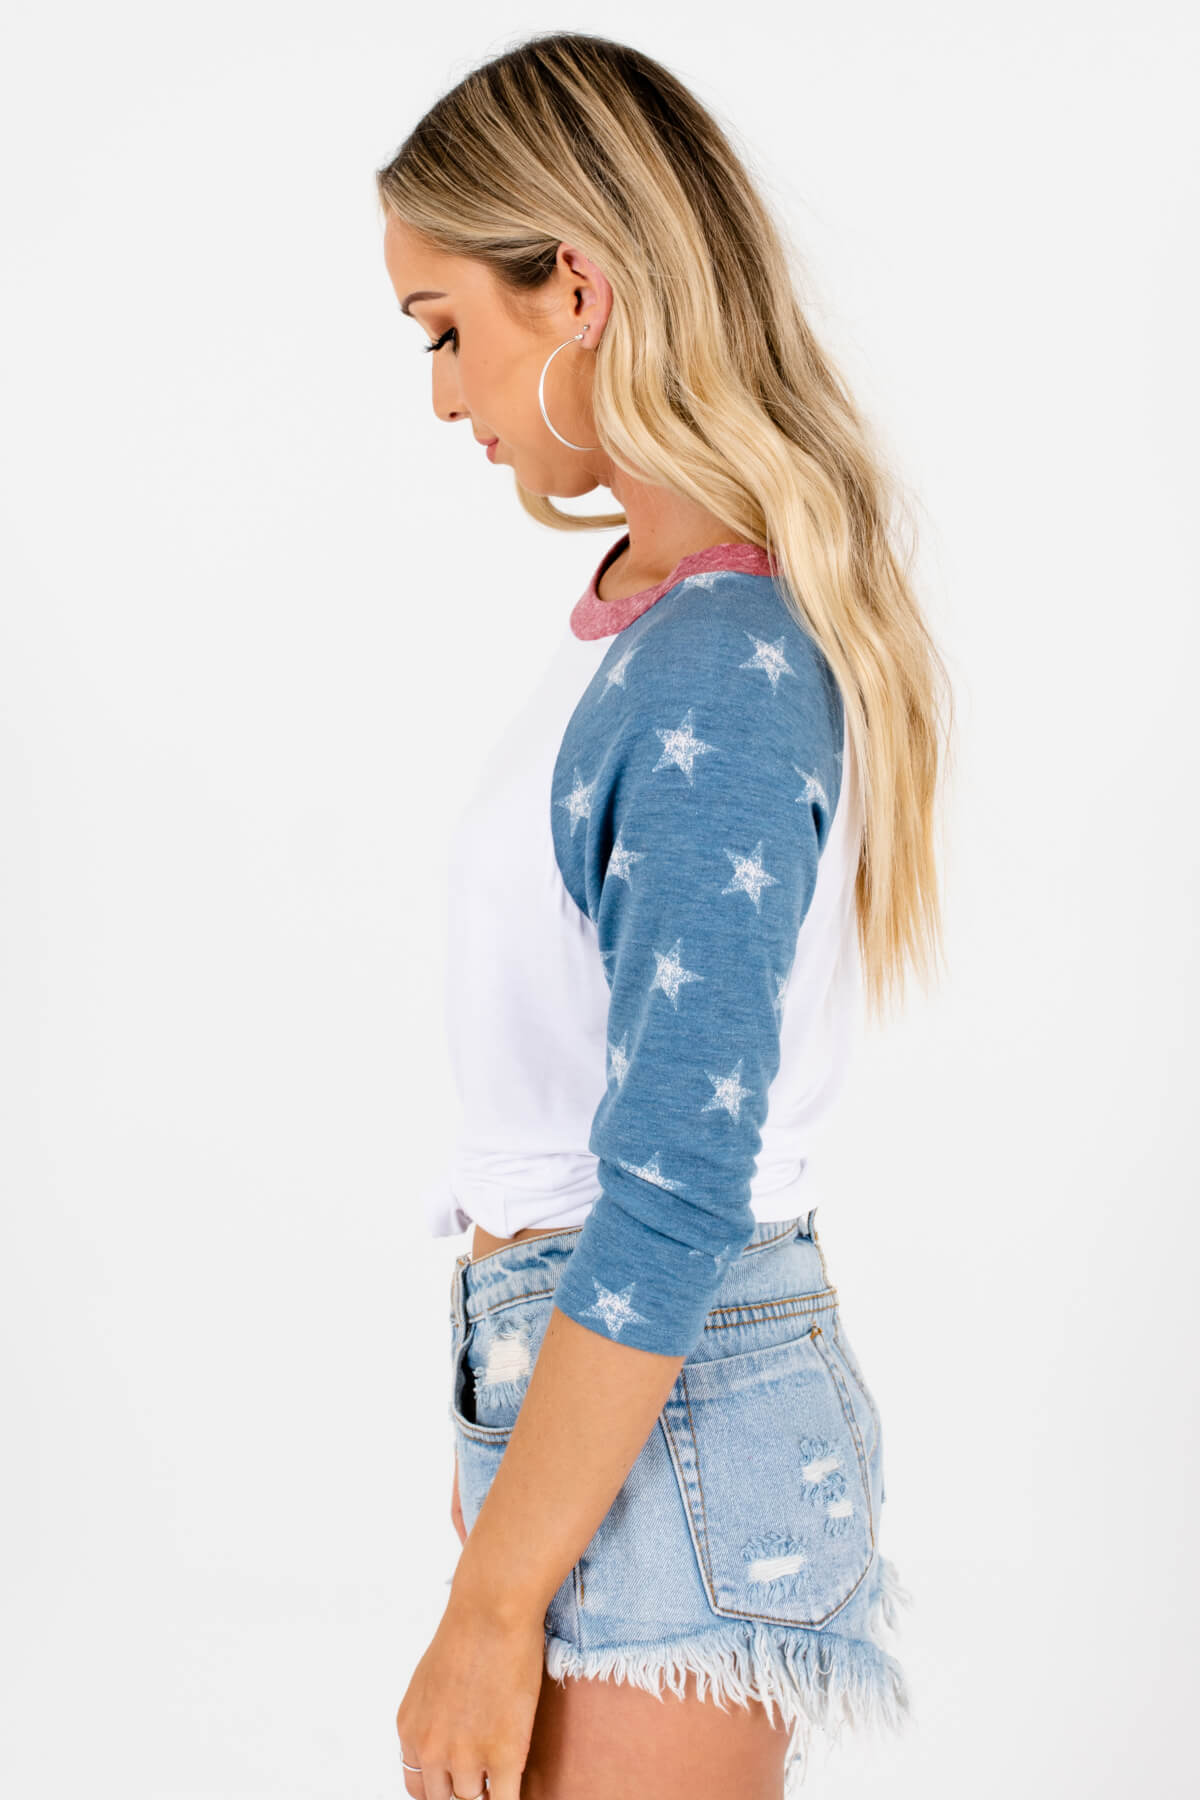 Red White and Blue 4th of July Boutique Clothing for Women